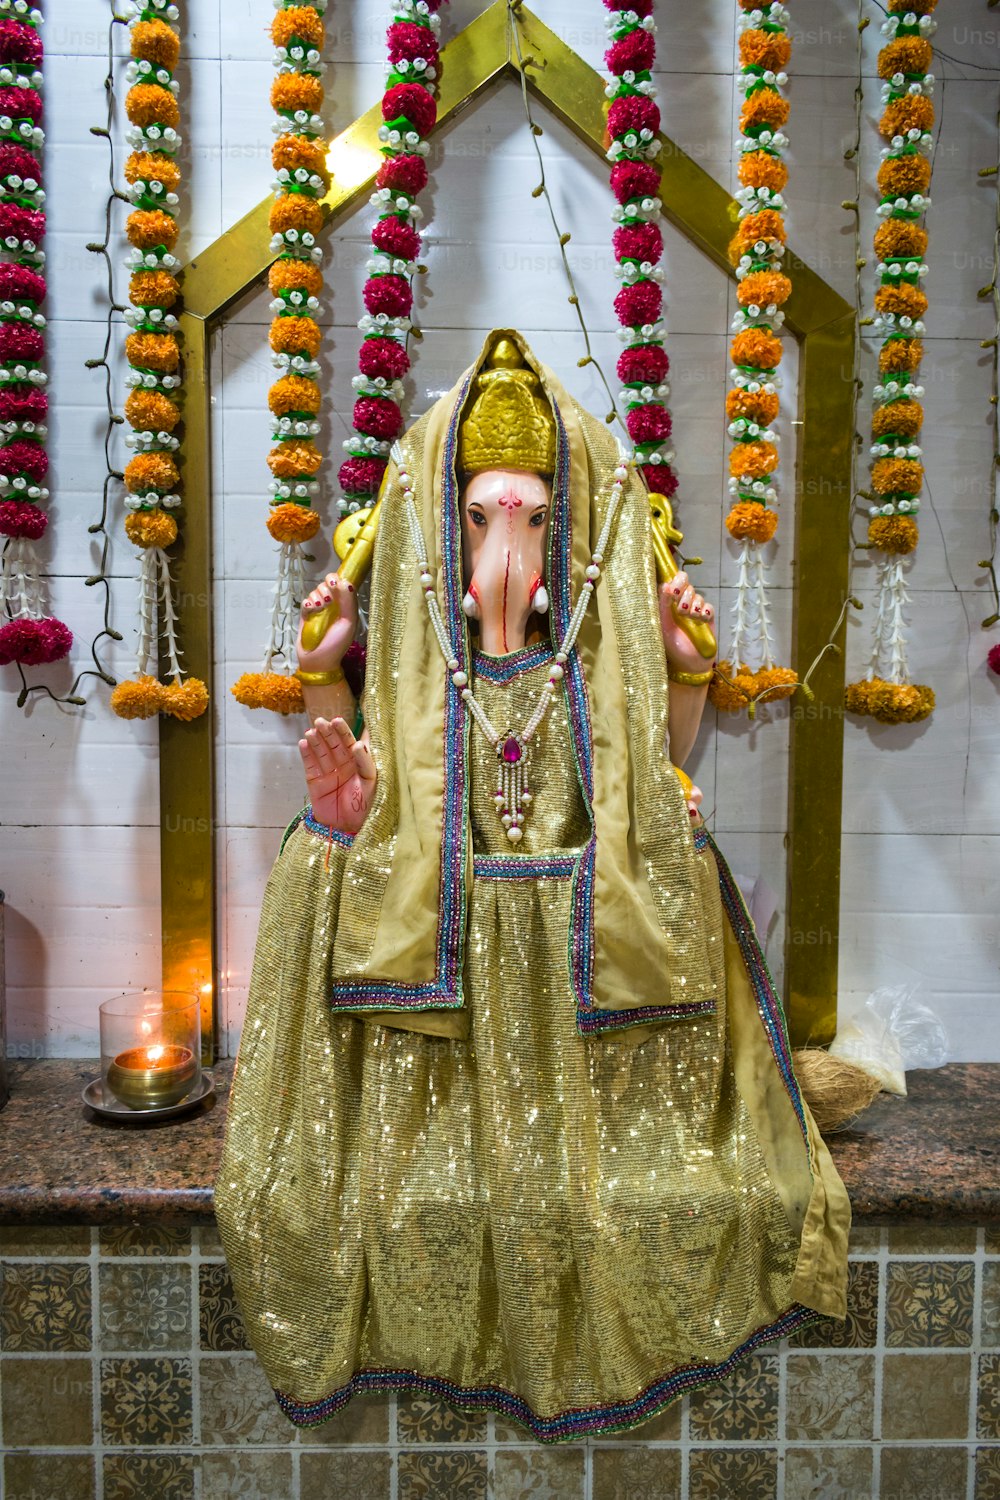 a statue of an elephant wearing a golden outfit